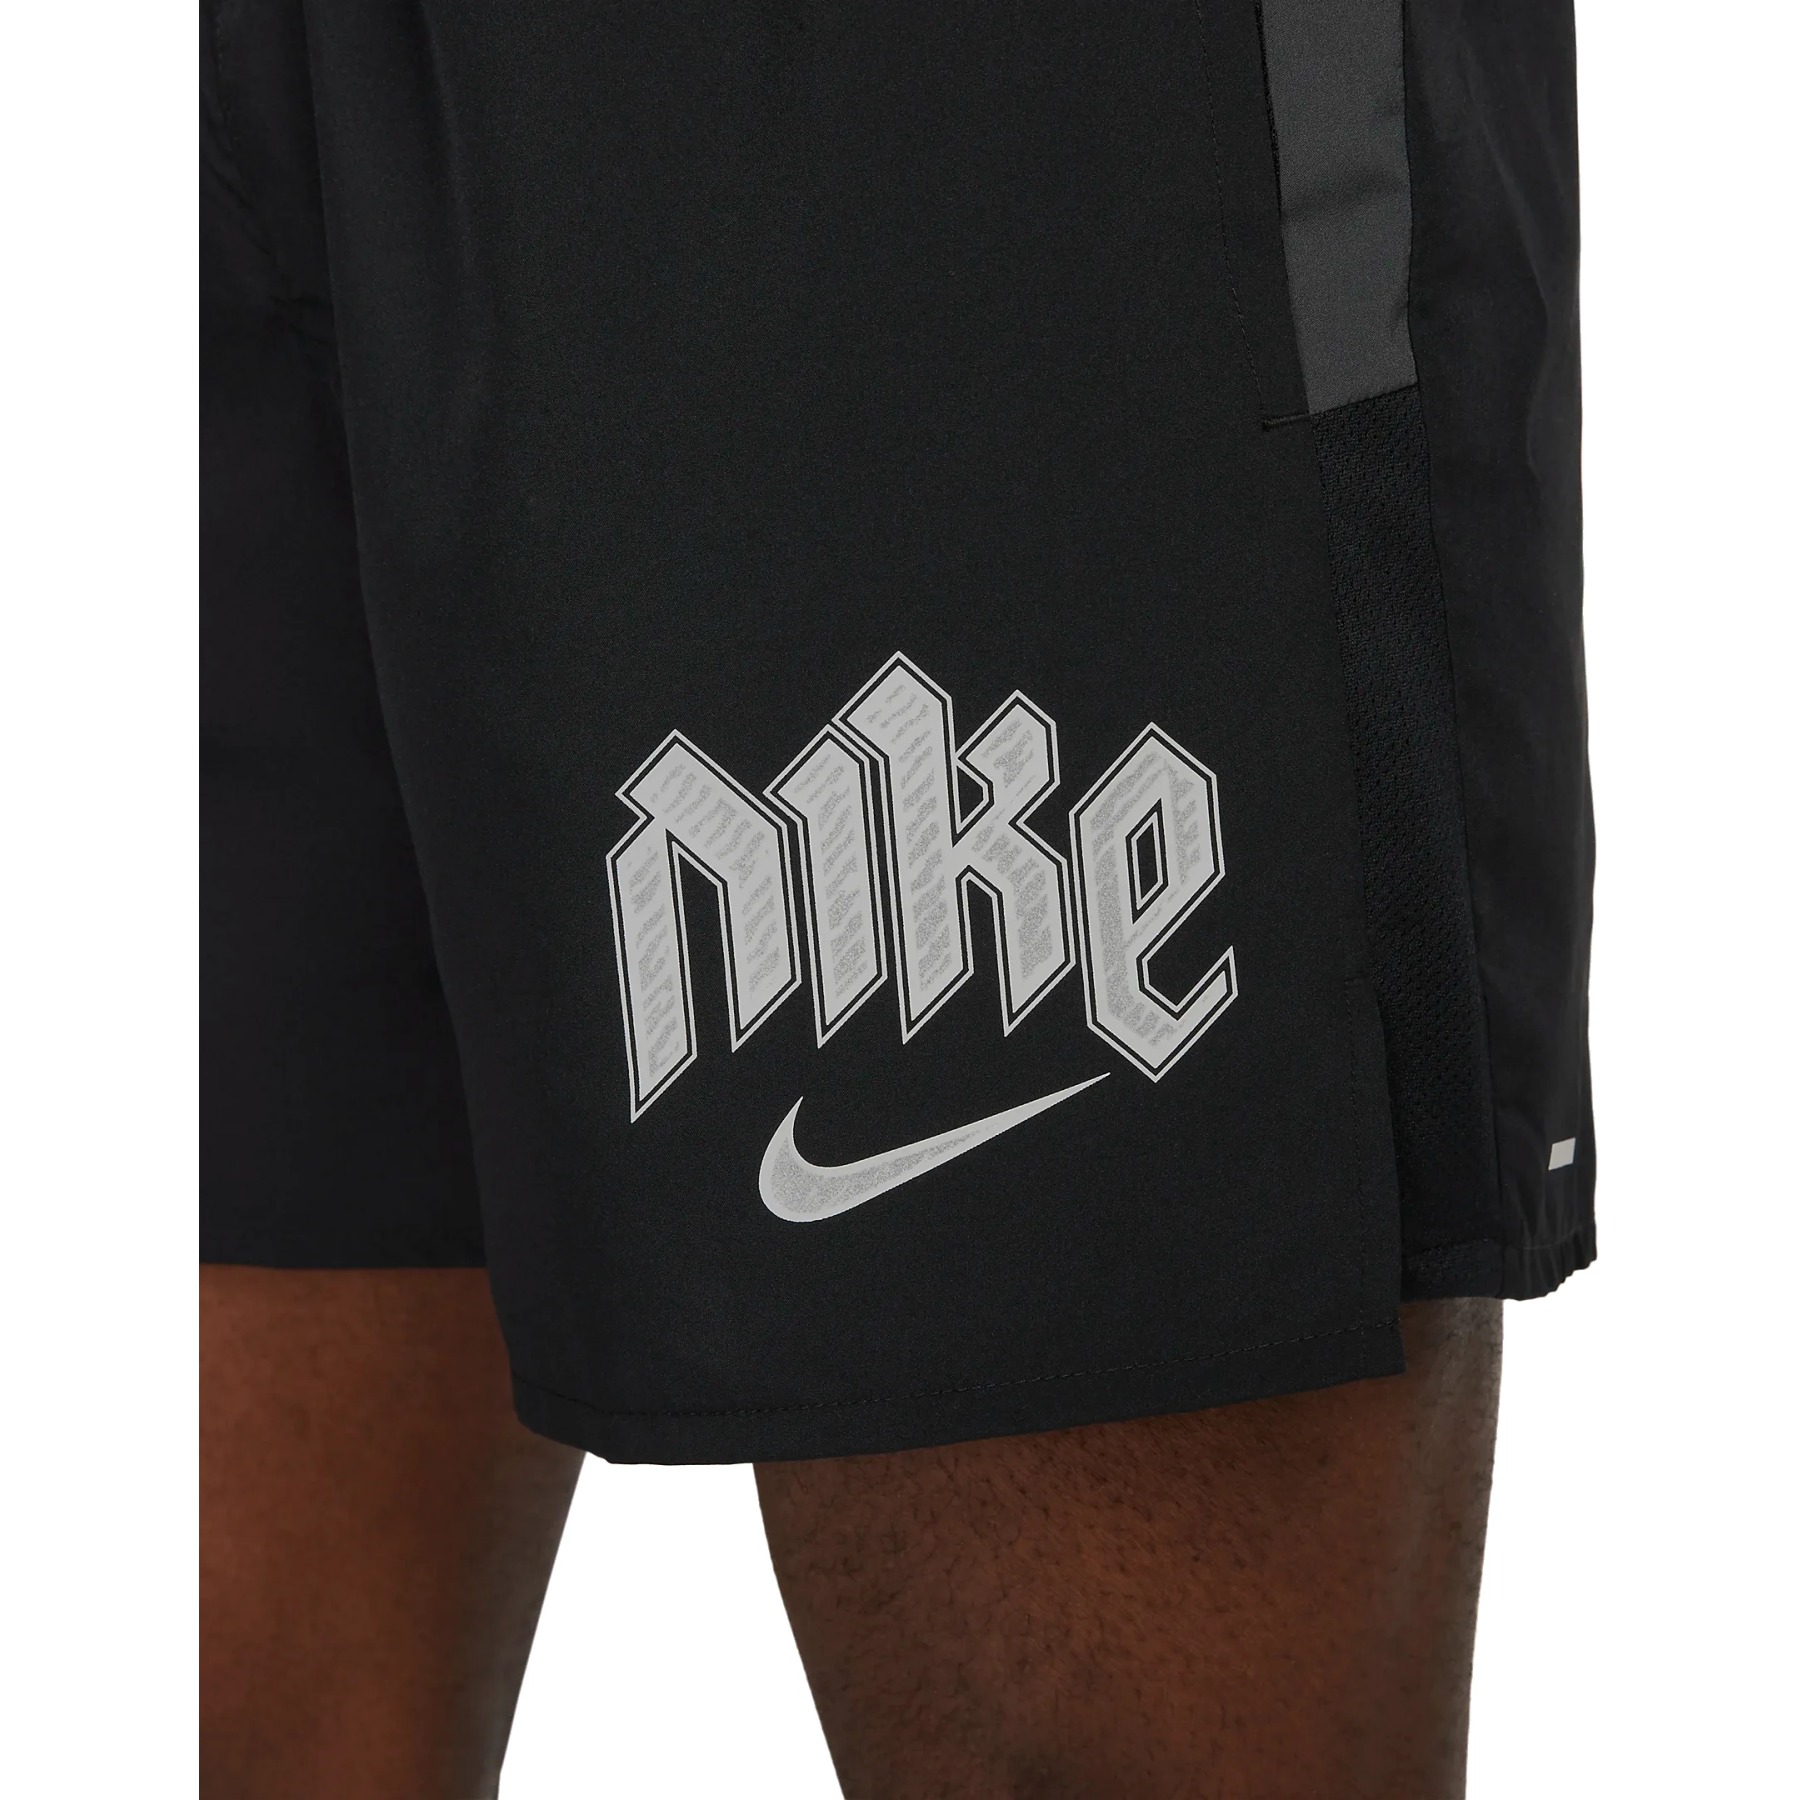 Short de Running Nike Challenger Dri-FIT 5 Brief-Lined Or pour Homme